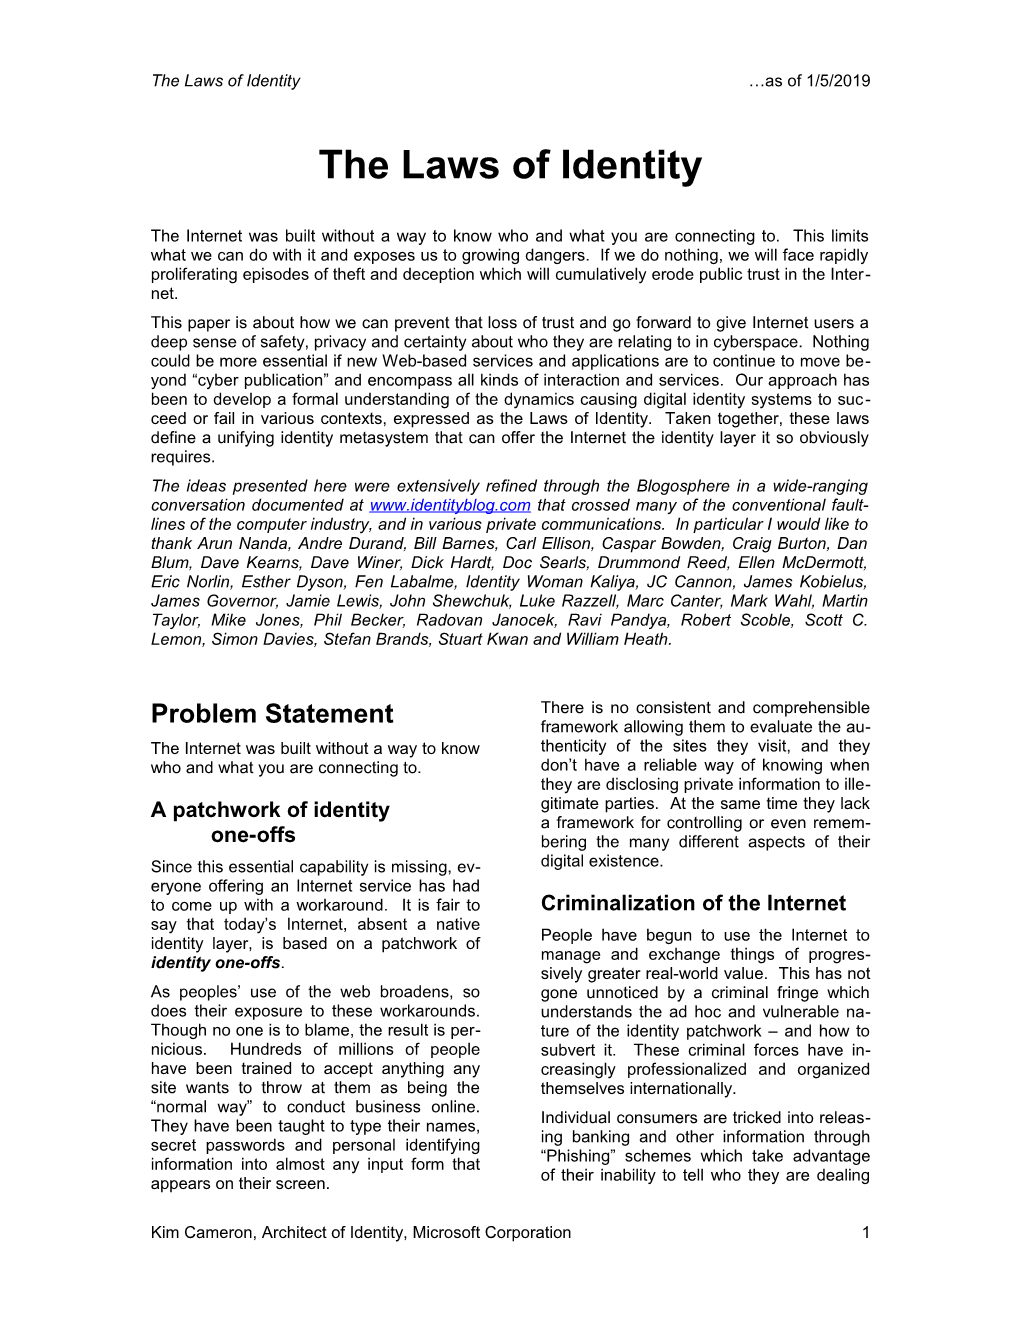 The Laws of Identity